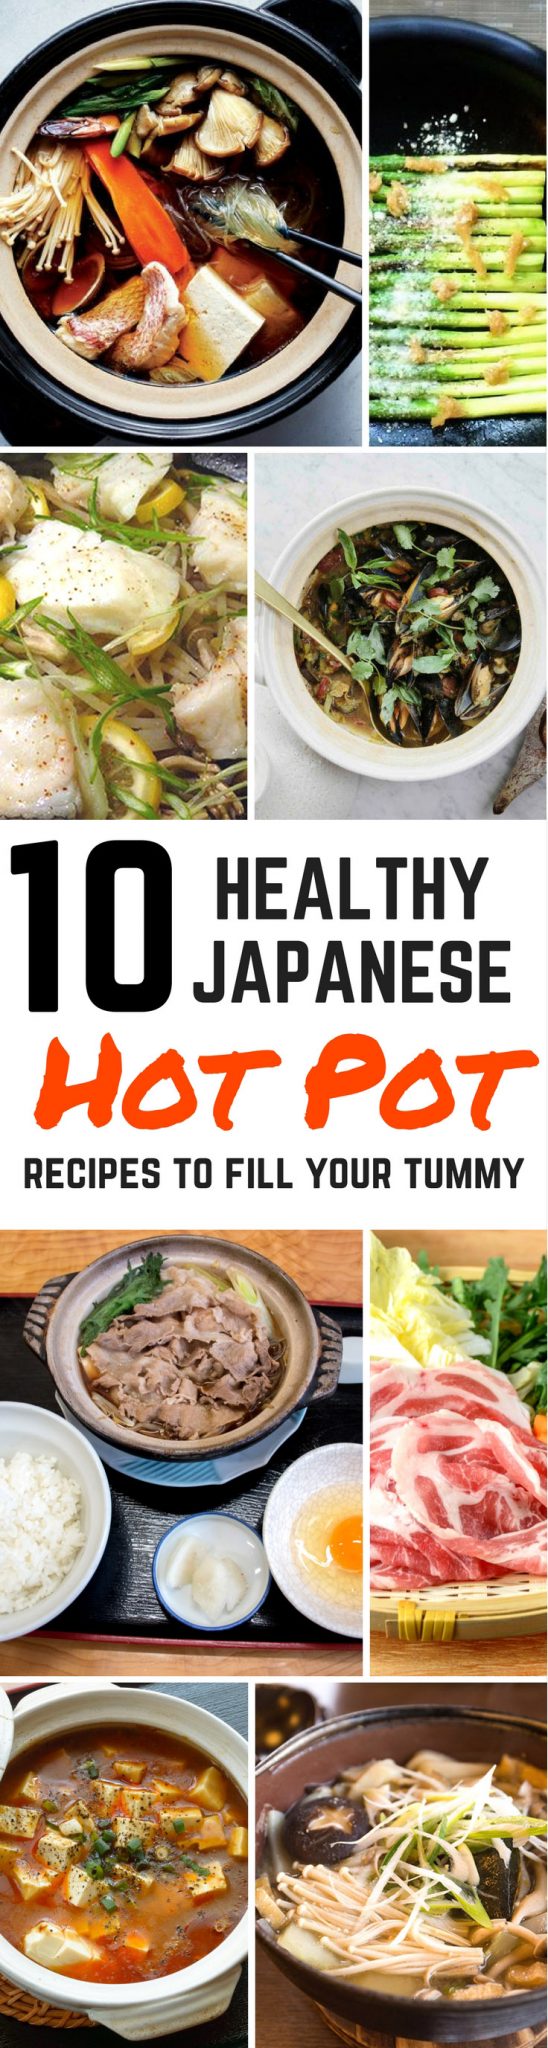 Here are the 10 Best Recipes to Cook in your Japanese Donabe Pot! The Donabe is used to create communal family one pot meals to shared at the dinner table. Used in Japanese for centuries, its usually made of clay - which allows heat and moisture to evenly move throughout the pot during the cooking process.#japanese #japanesefood #japaneserecipes #donabe #donabepot #donaberecipe #hotpot #japanesehotpot